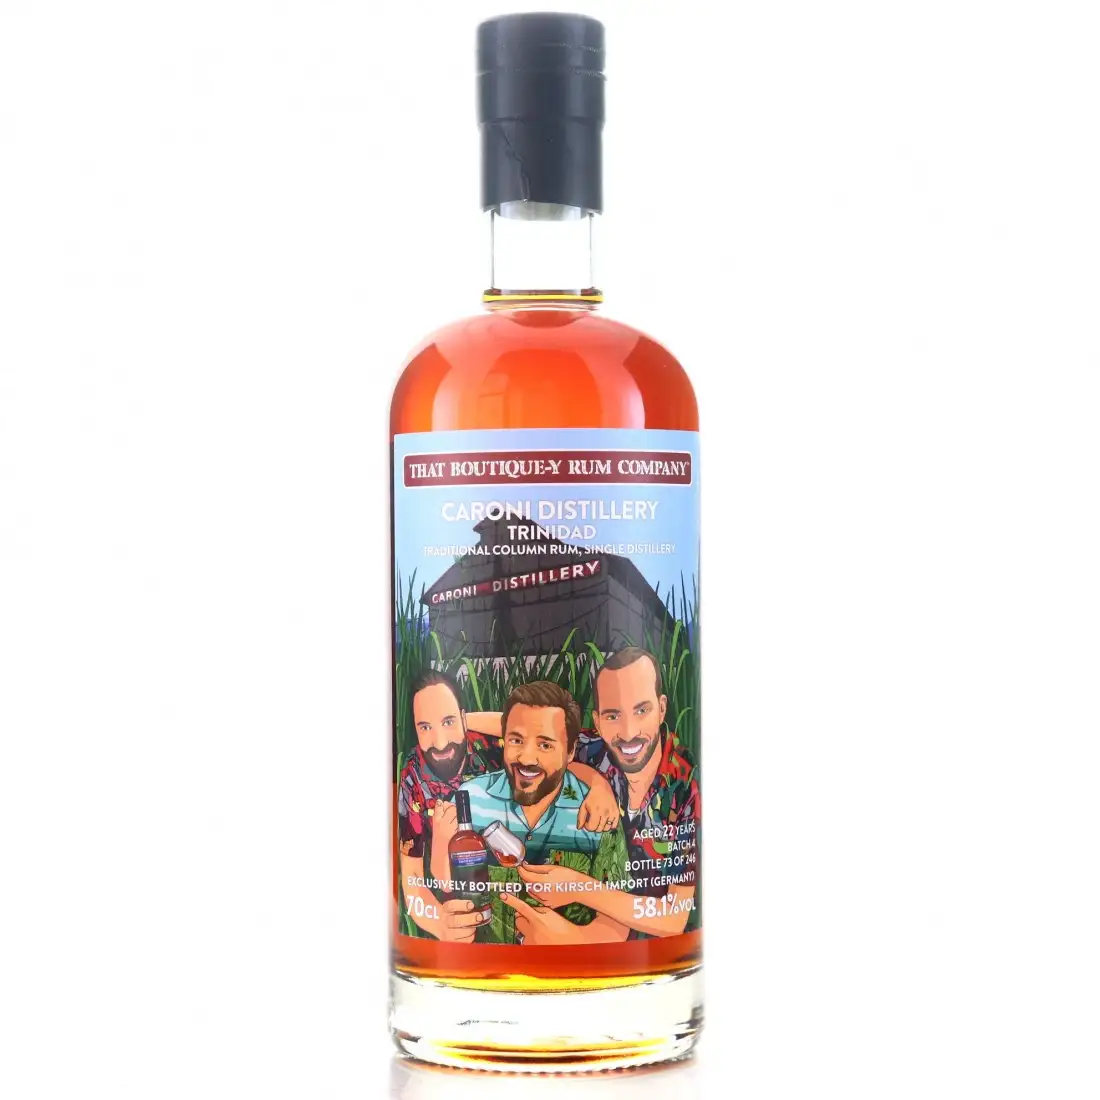 Image of the front of the bottle of the rum Bottled for Kirsch Whisky